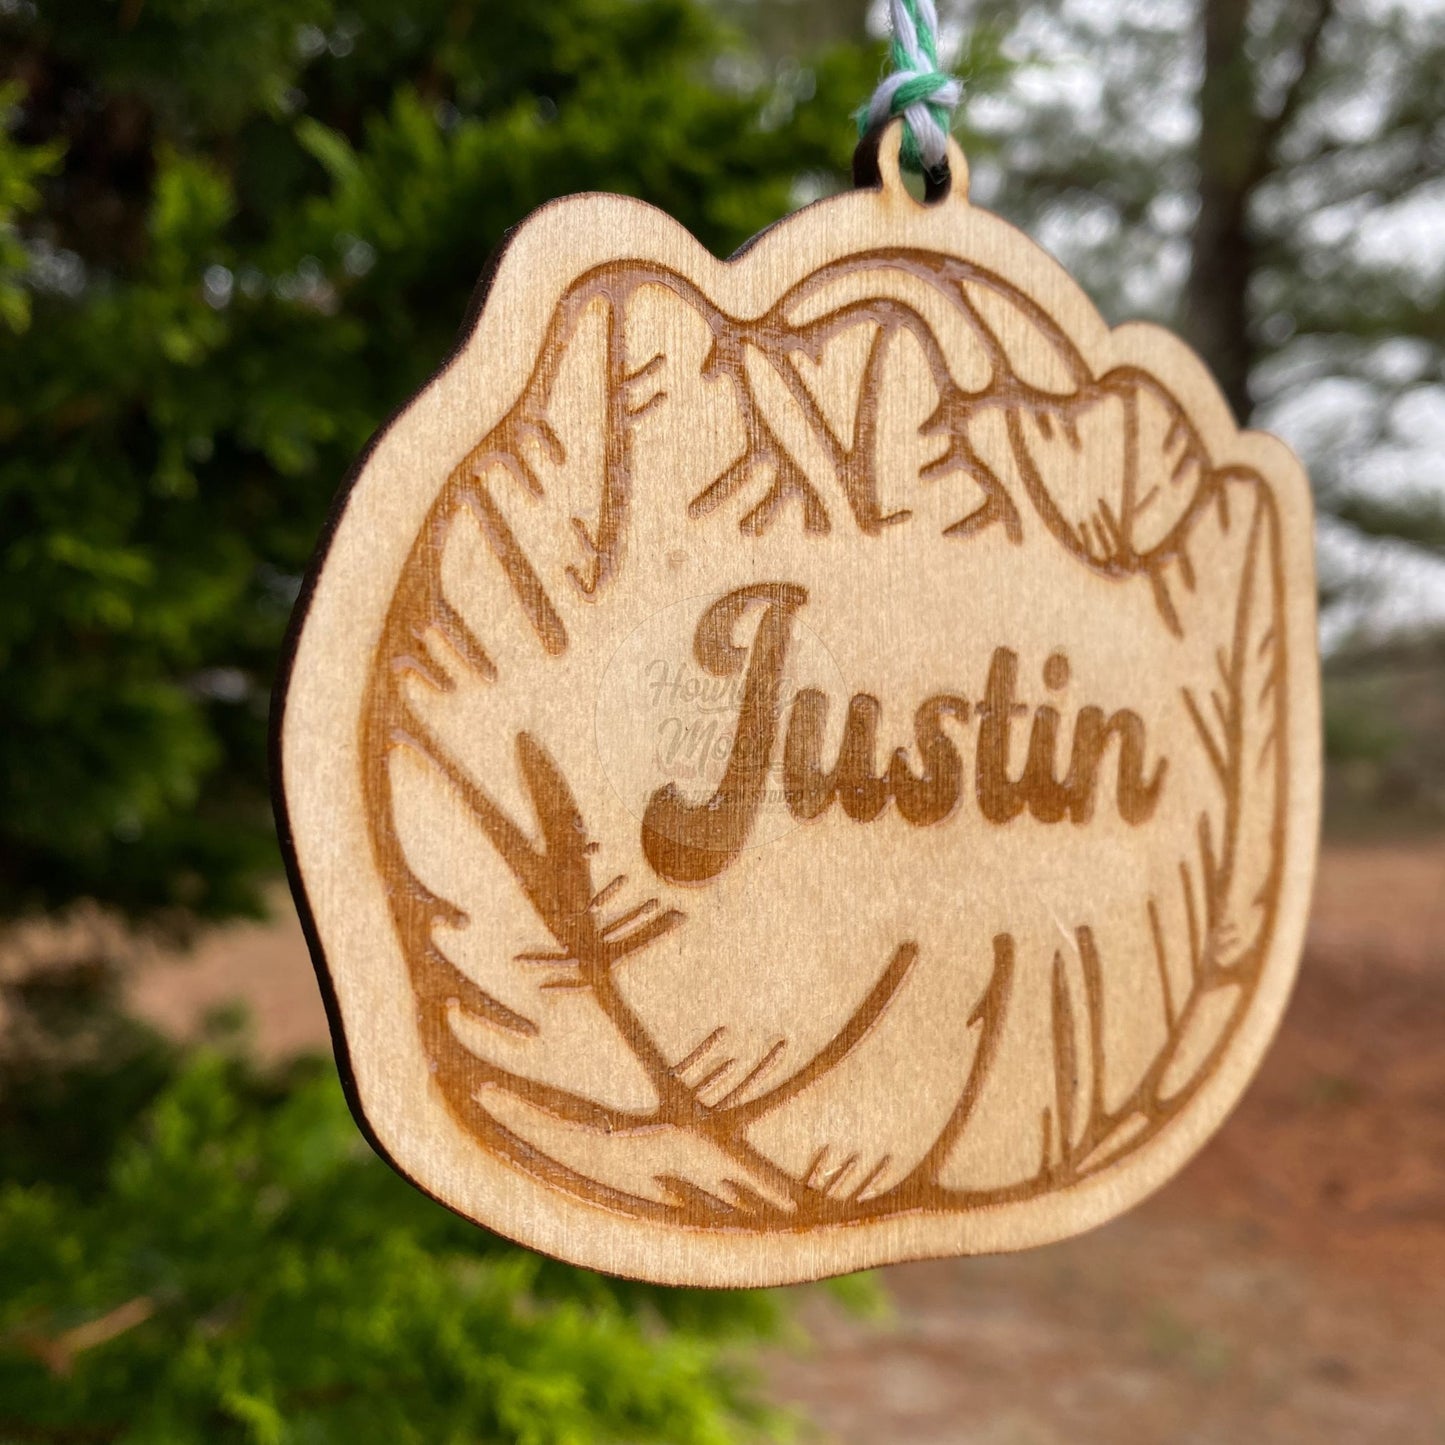 Left side view of Personalized cabbage ornament hanging from a tree with green & white twine. Made by Howling Moon Laser Design in Virginia, USA